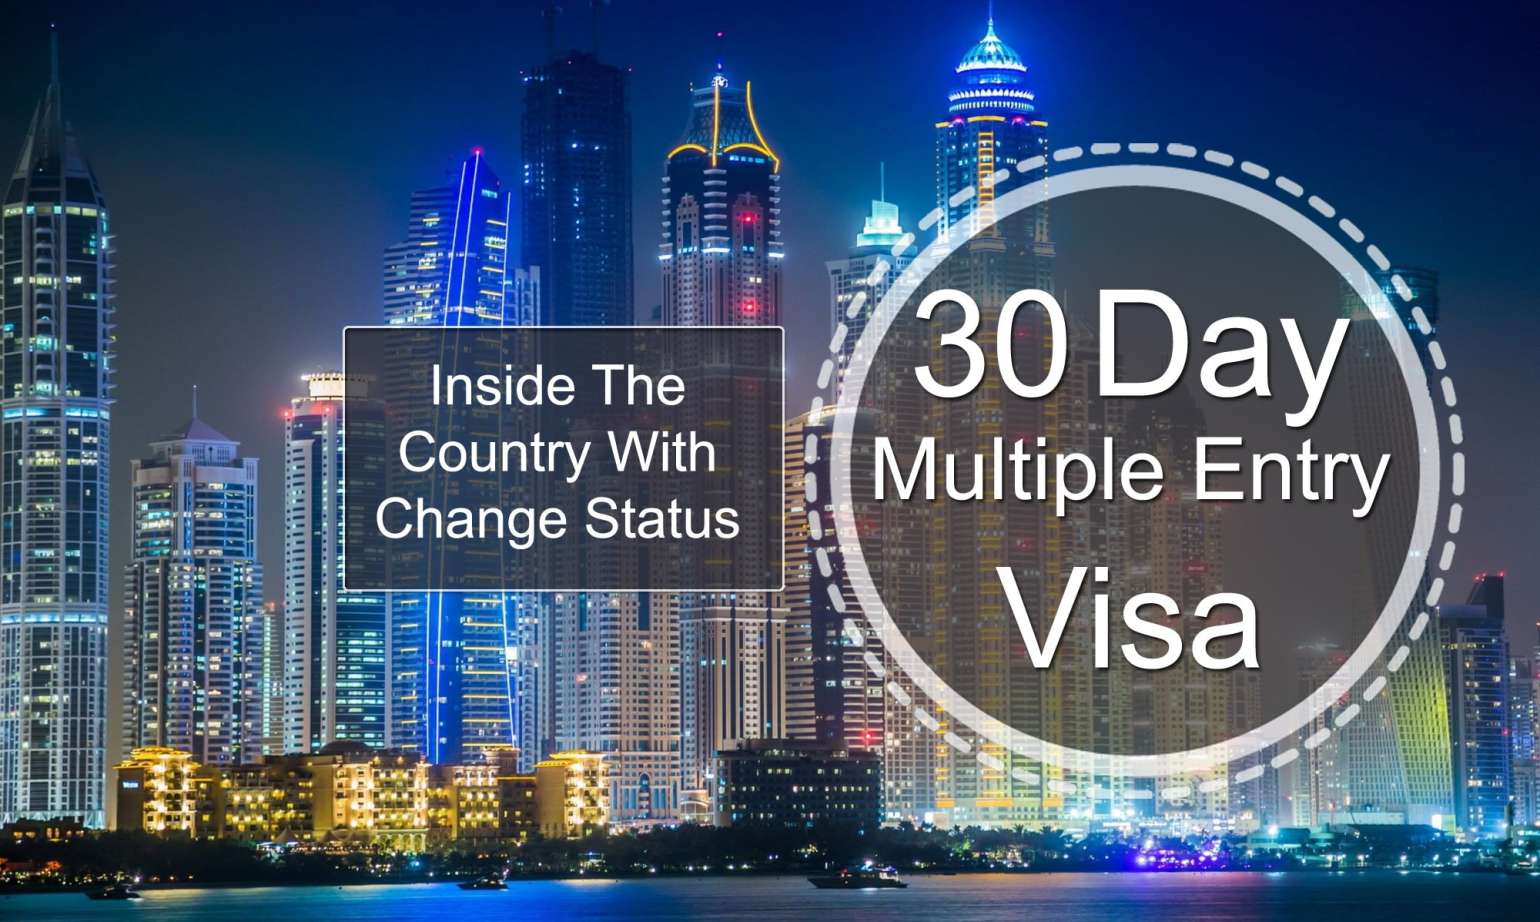 Inside the country with Change Status 30 Days Multiple Entry Visa